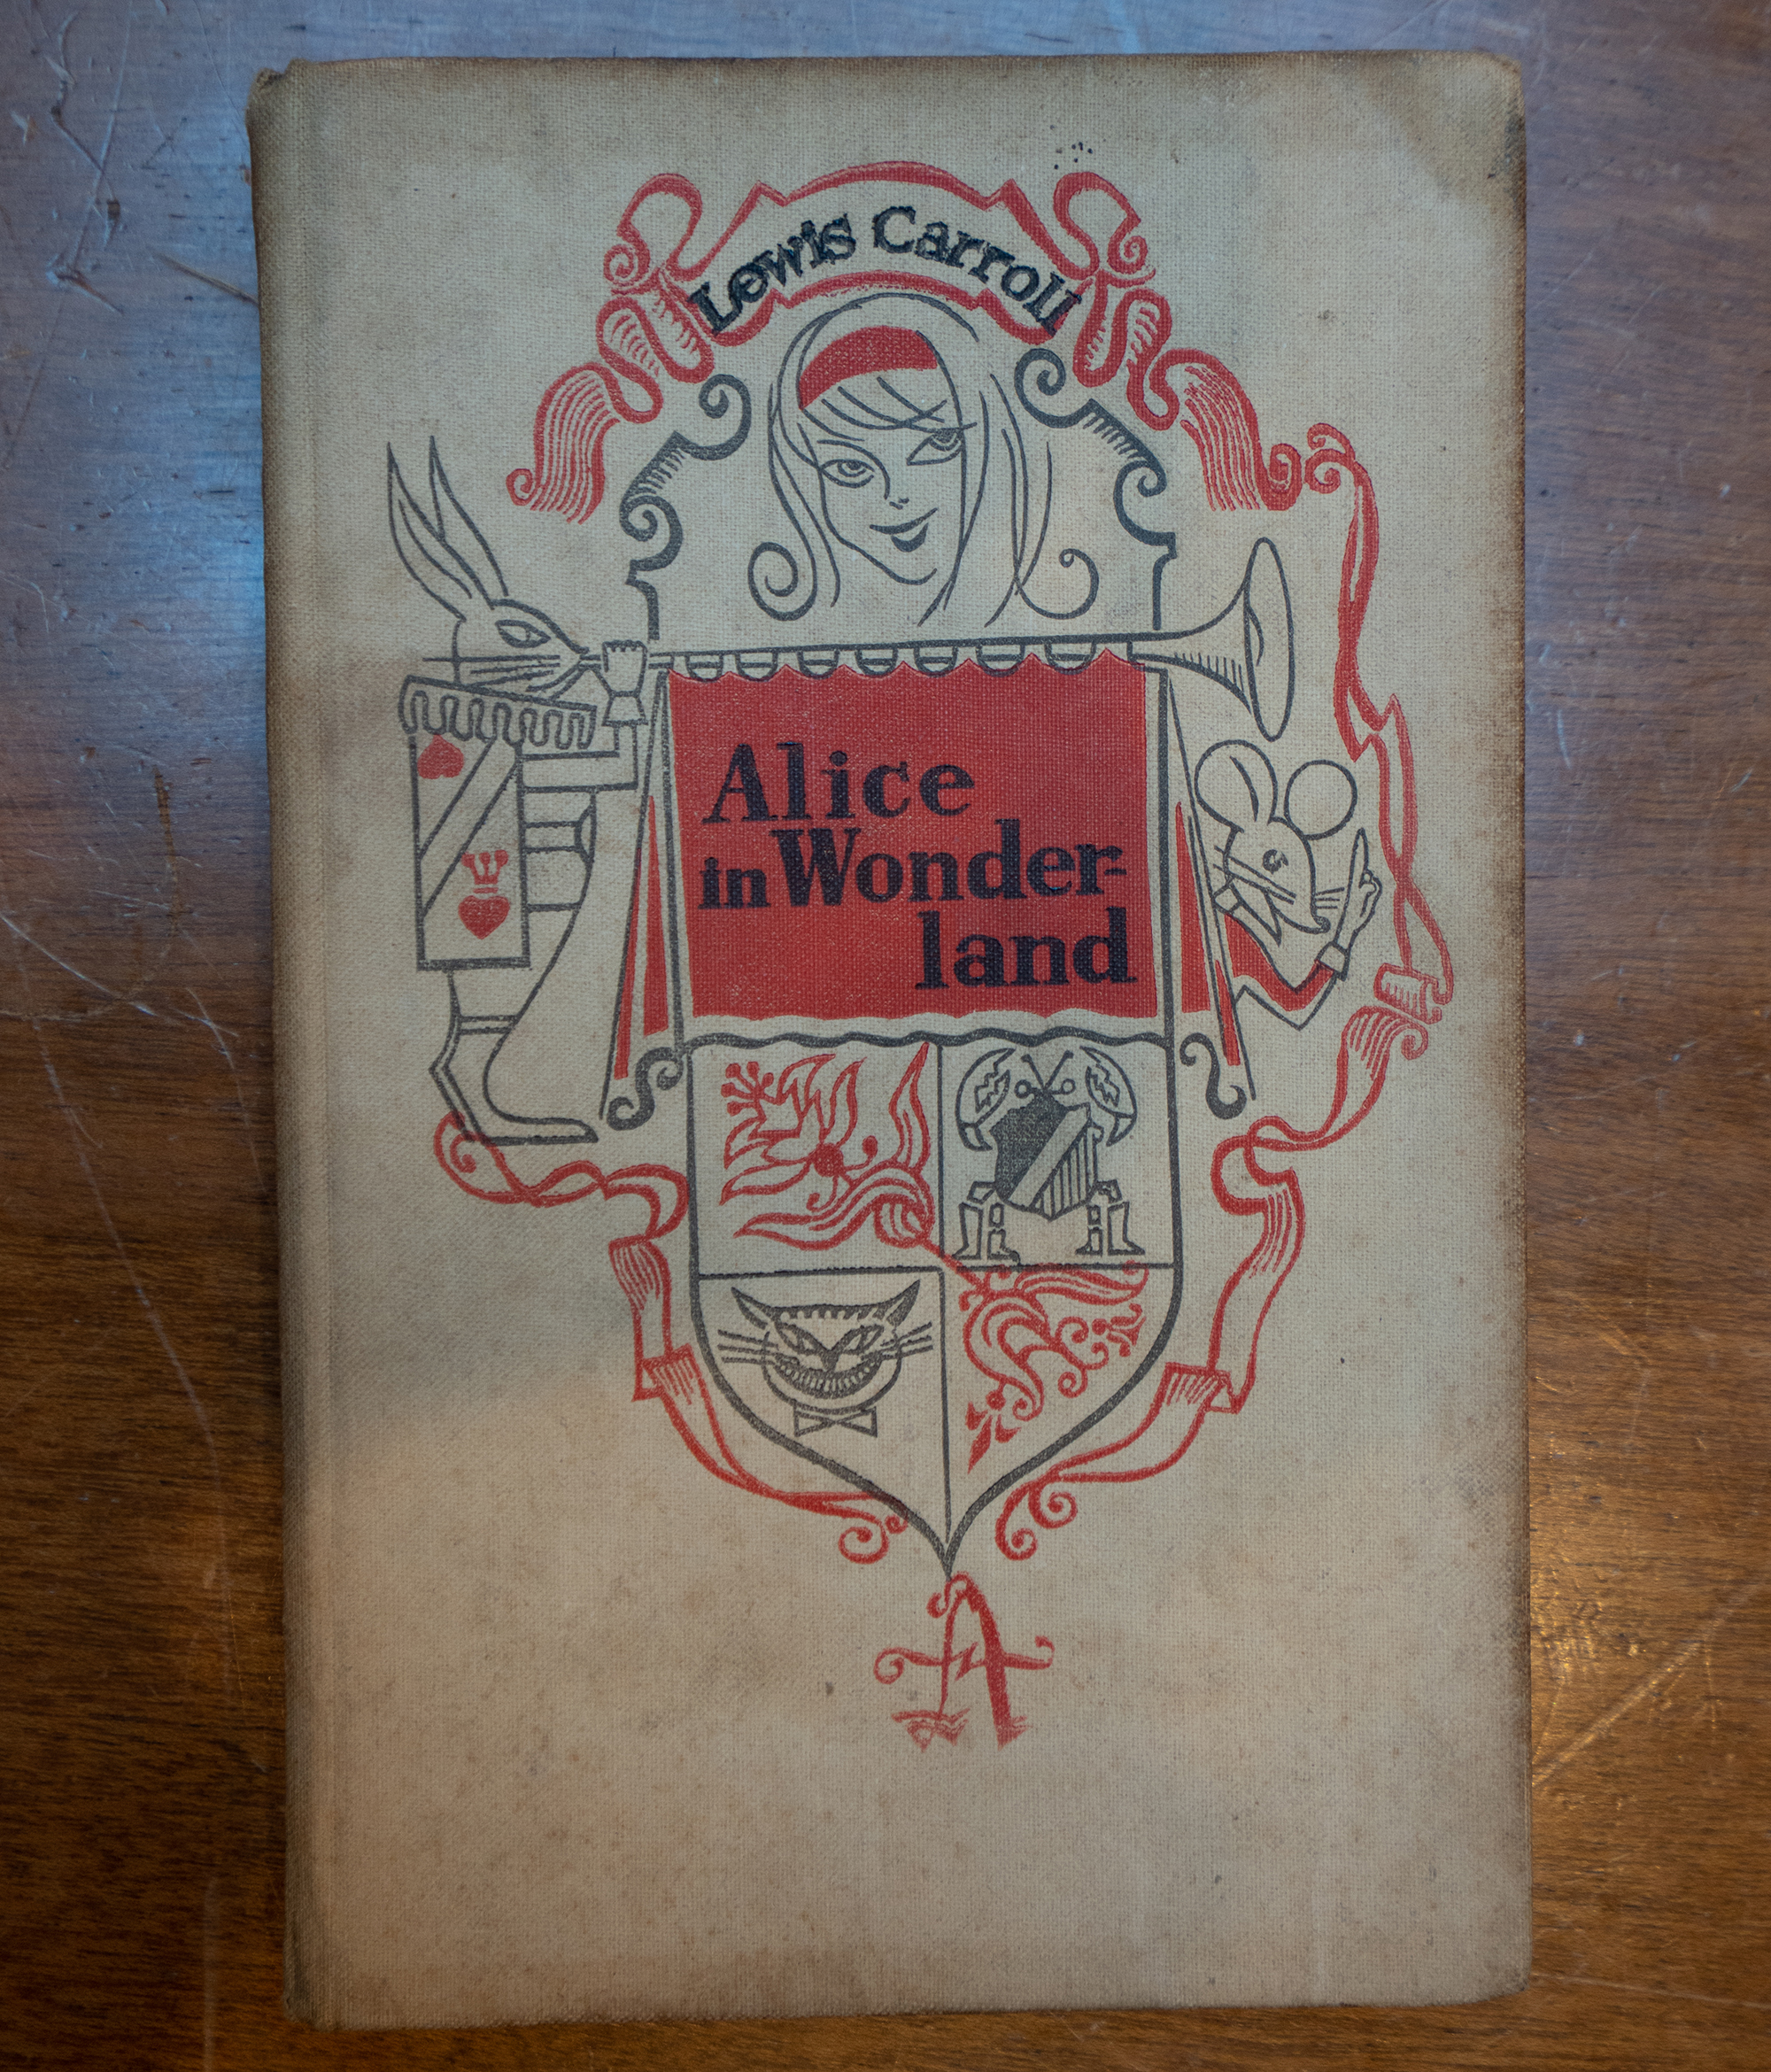 A copy of 'Alice in Wonderland' lies on a wooden table